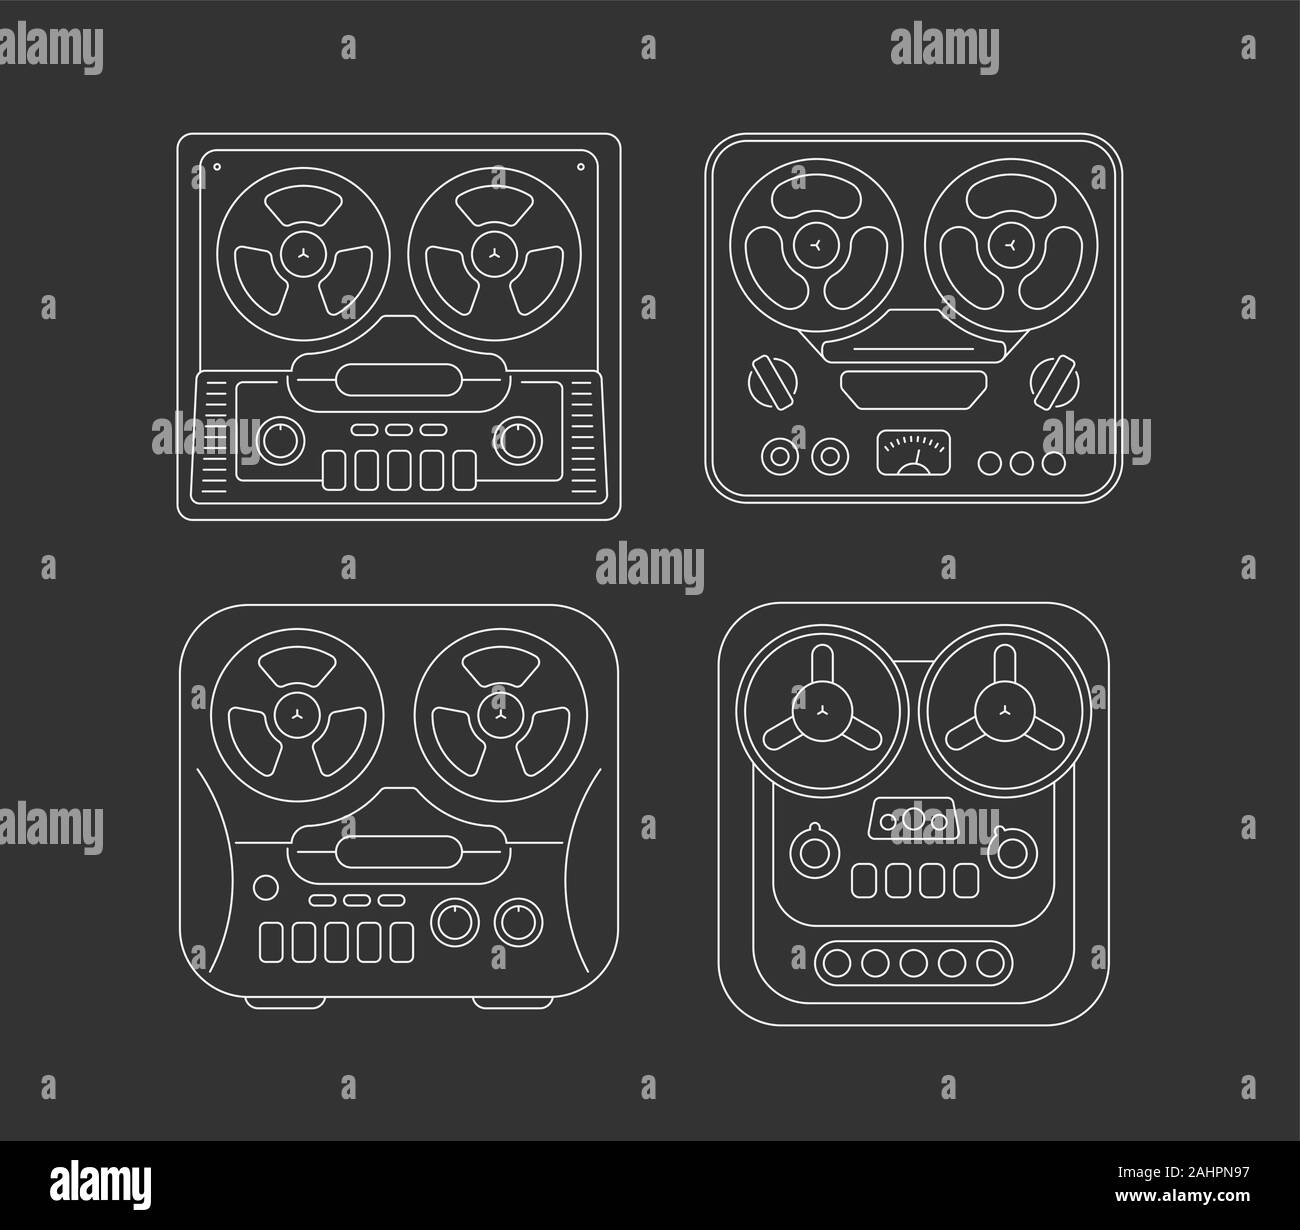 White line art images isolated on a dark grey background Retro Tape Recorders vector illustration. Four unique design elements. Stock Vector